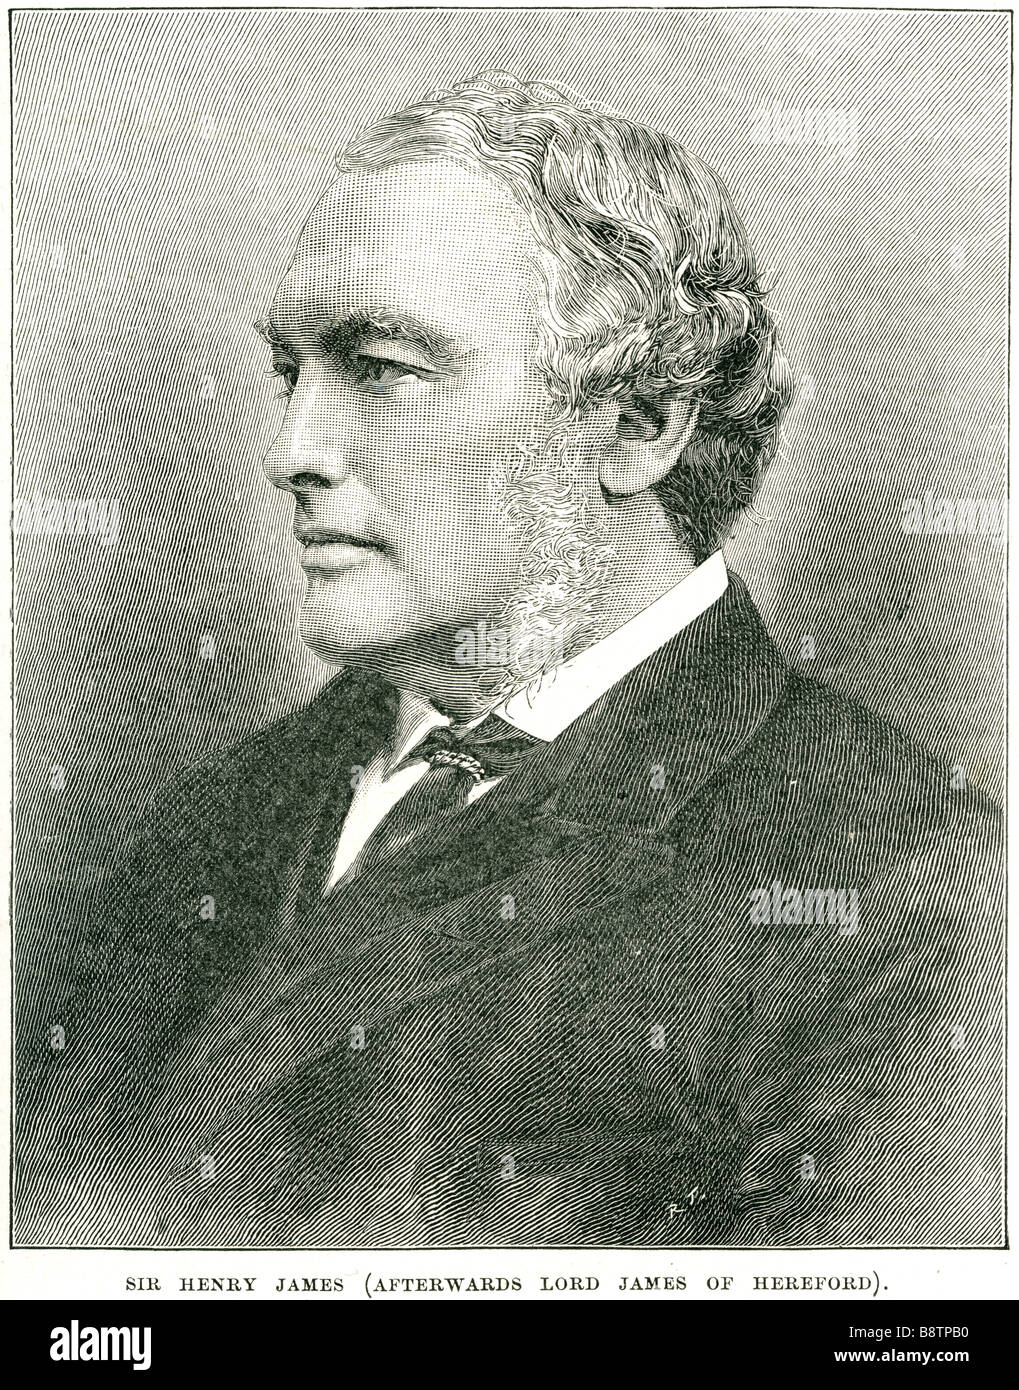 sir henry james (afterwards lord james of hereford) Henry James, 1st Baron James of Hereford PC, QC (30 October 1828 – 18 August Stock Photo